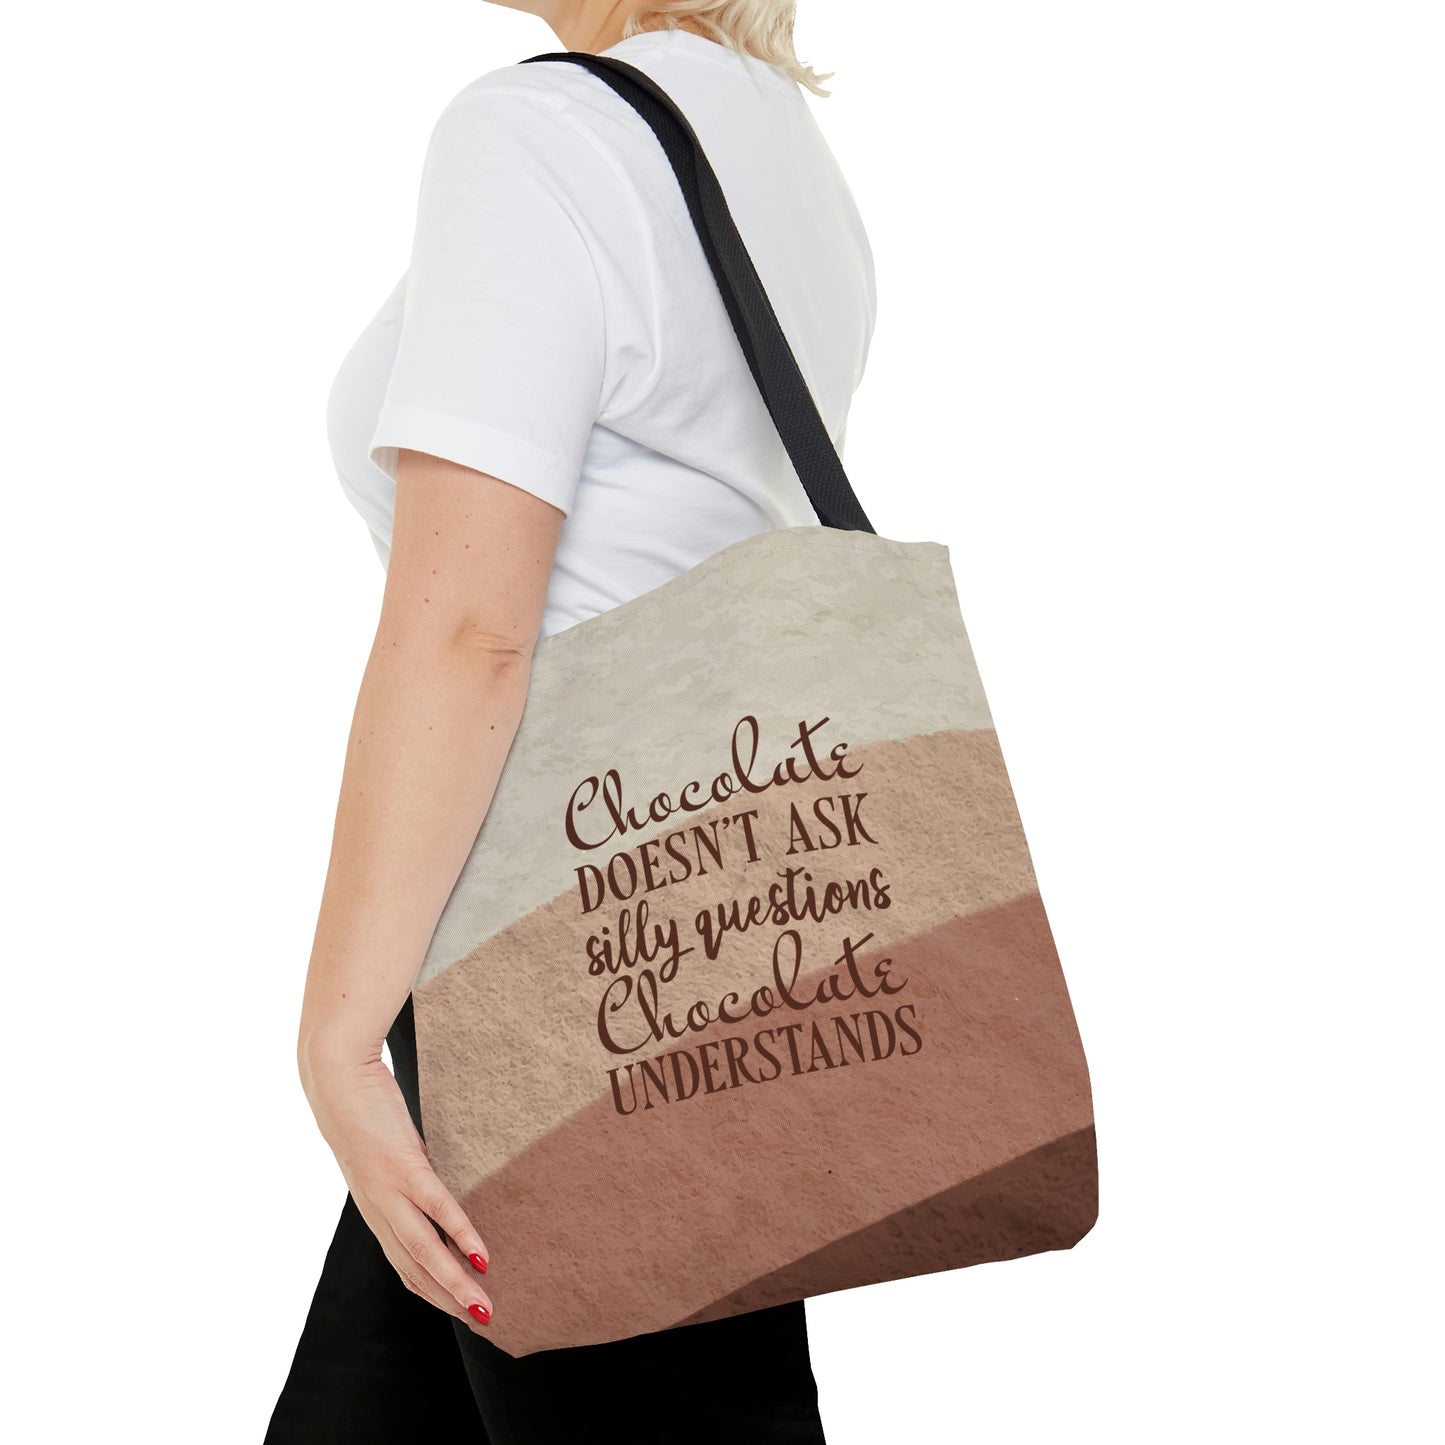 Chocolate Doesn’t Ask Questions Indulge in the Sweetness Aesthetic Art AOP Tote Bag